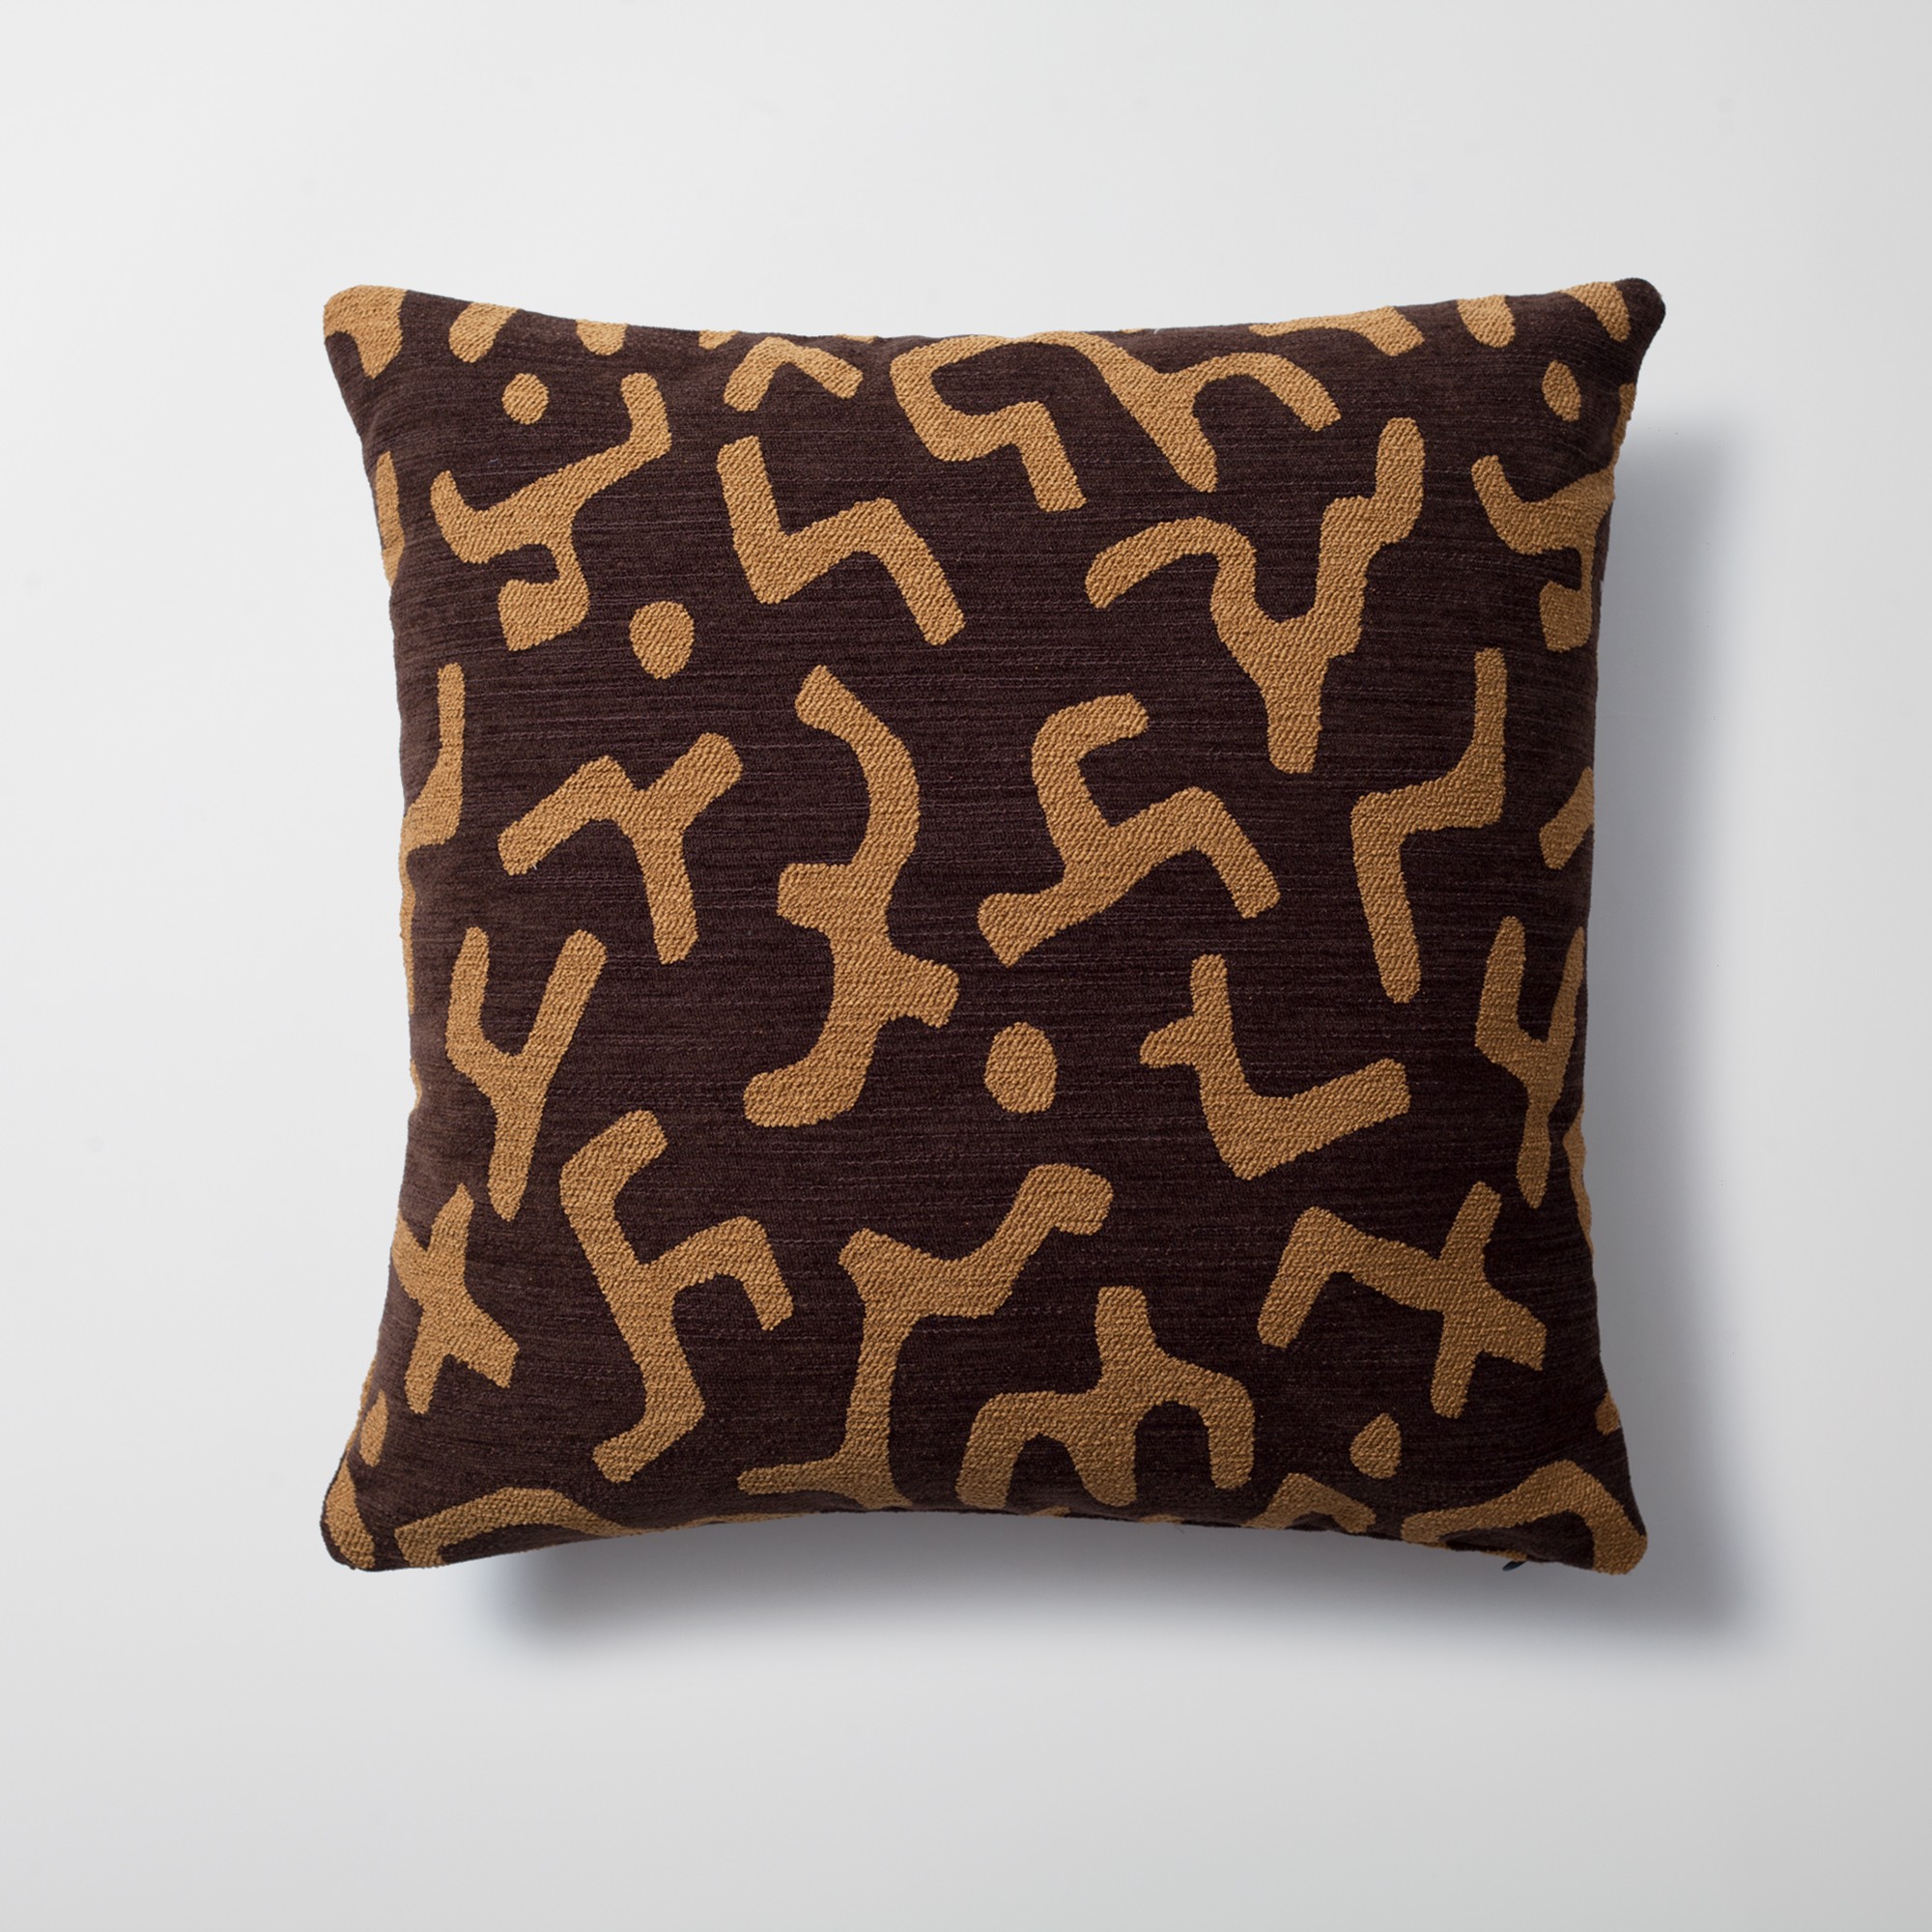 "Nandos" - Maze Patterned 20x20 Inch Pillow - Brown (Cover Only)